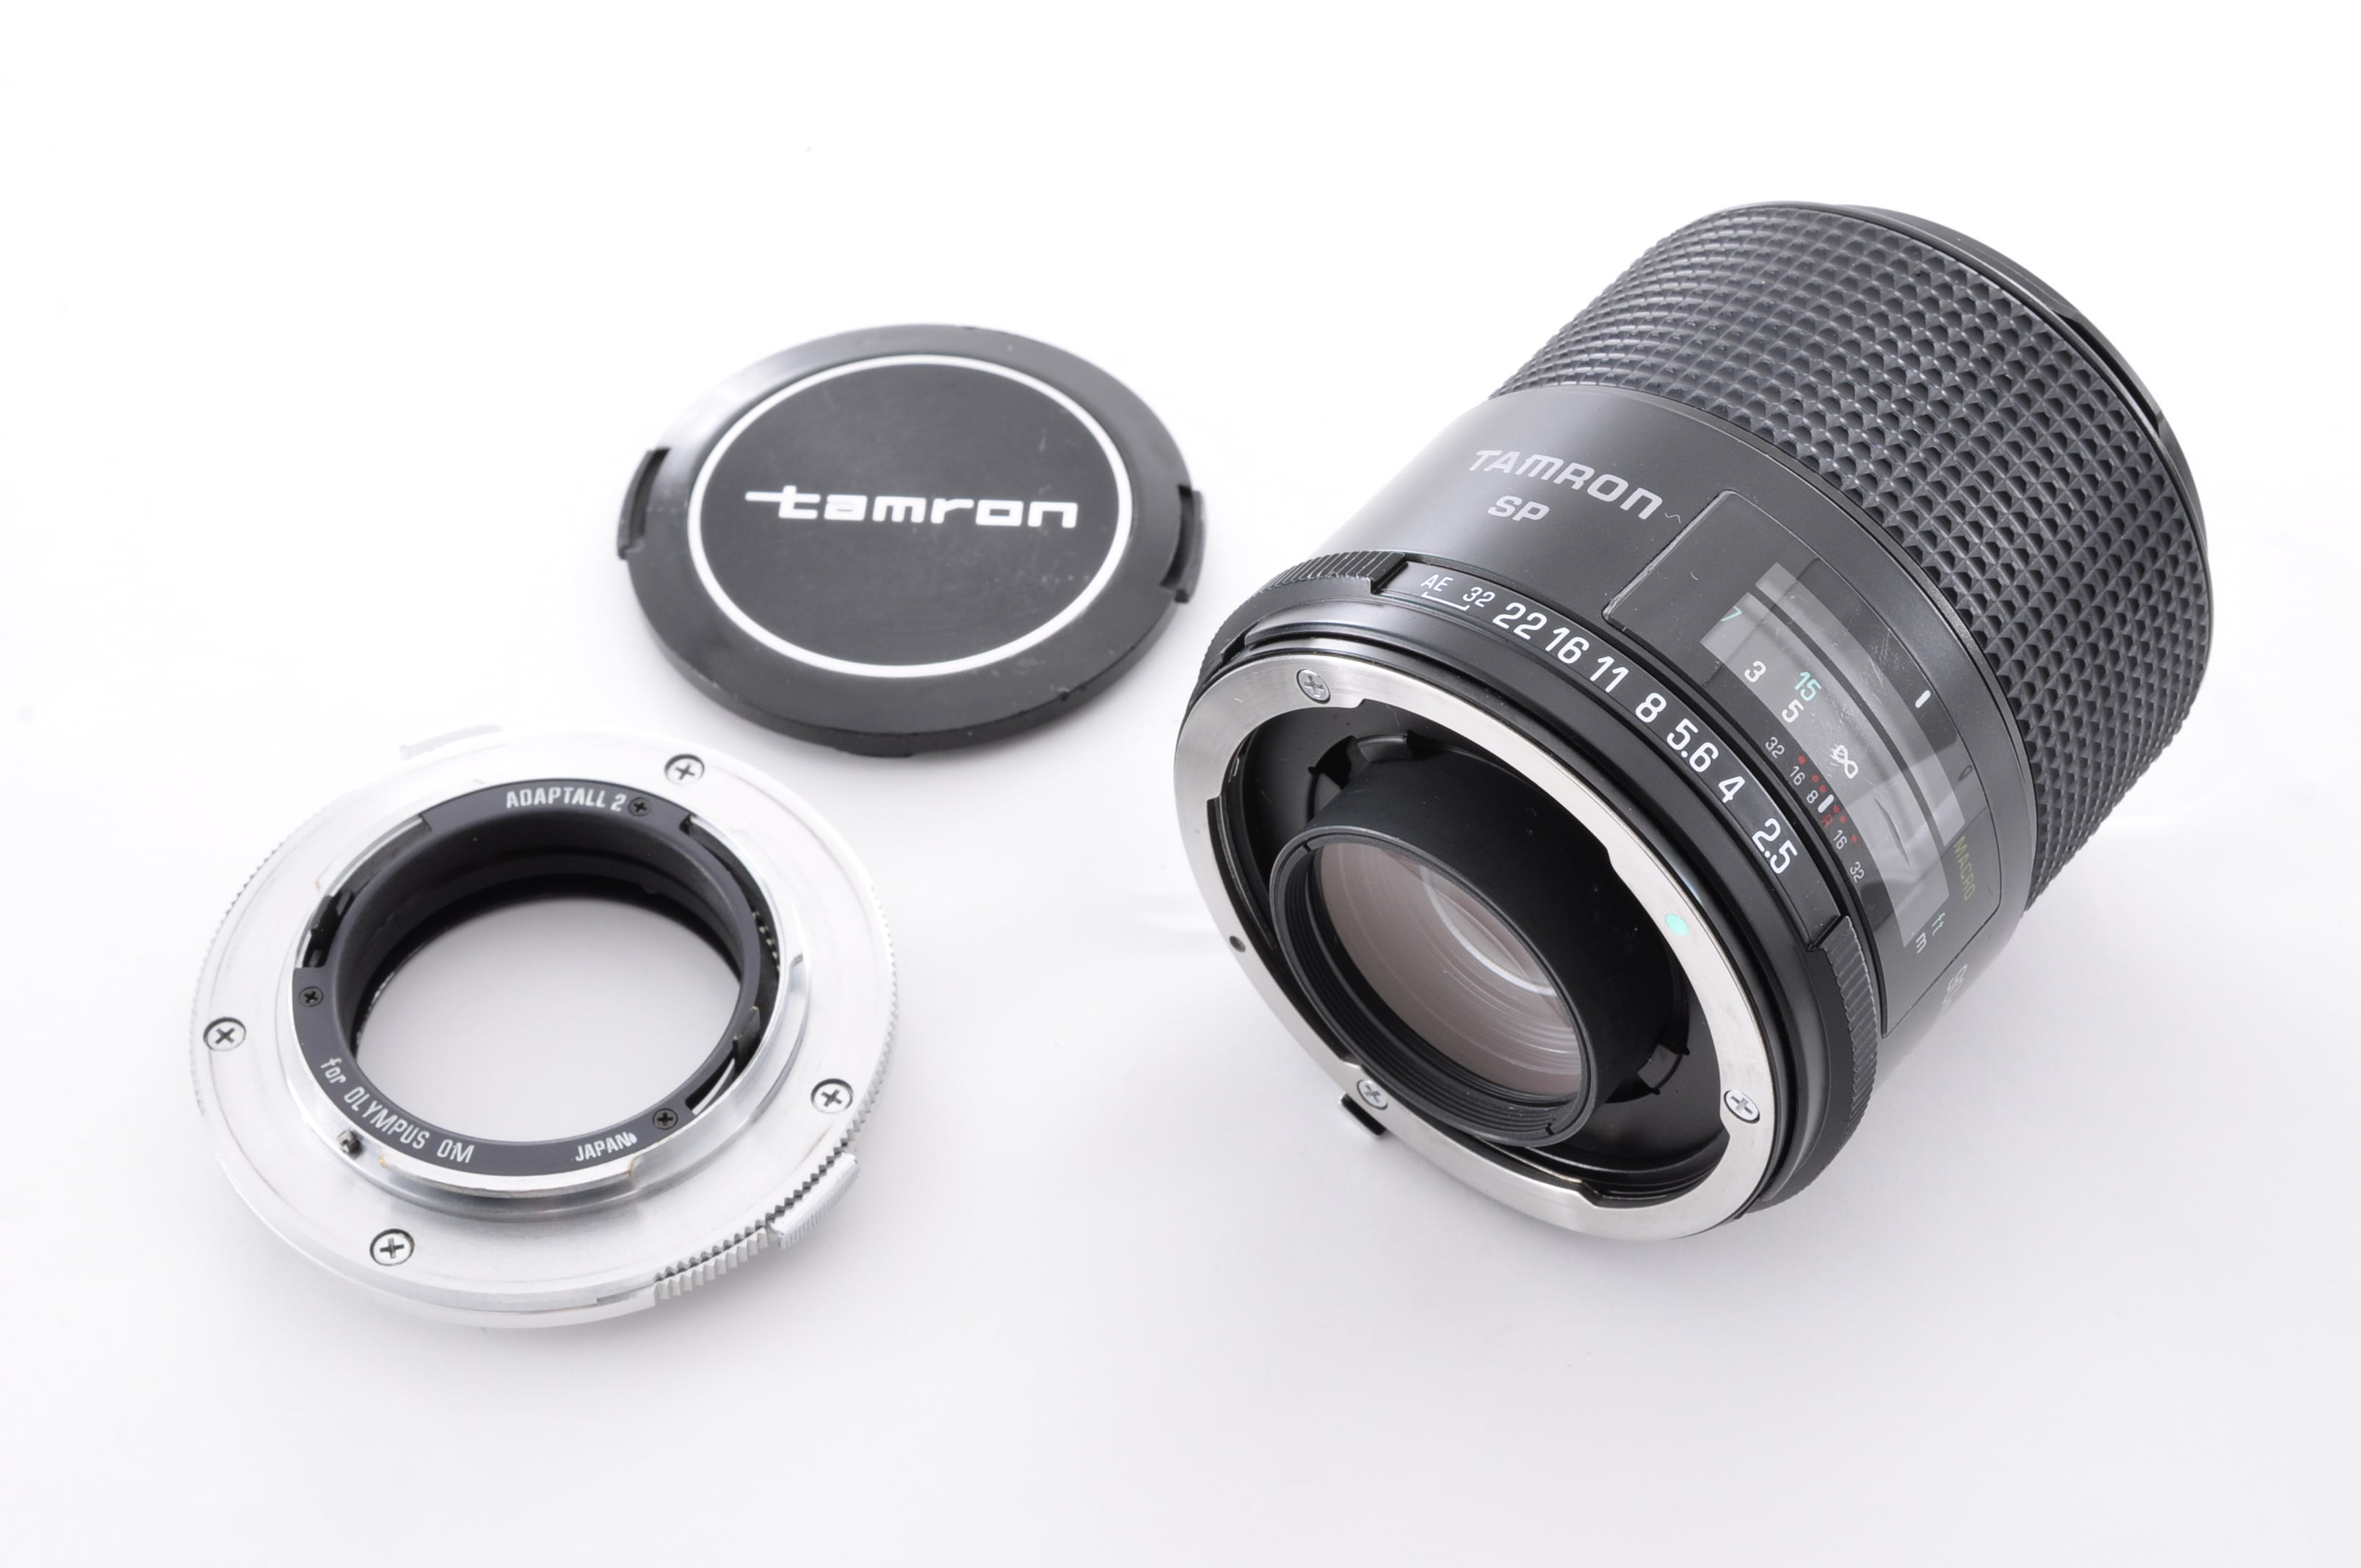 Tamron SP 90mm F/2.5 MF Macro Lens For Olympus OM Mount [Near Mint-] From Japan img14